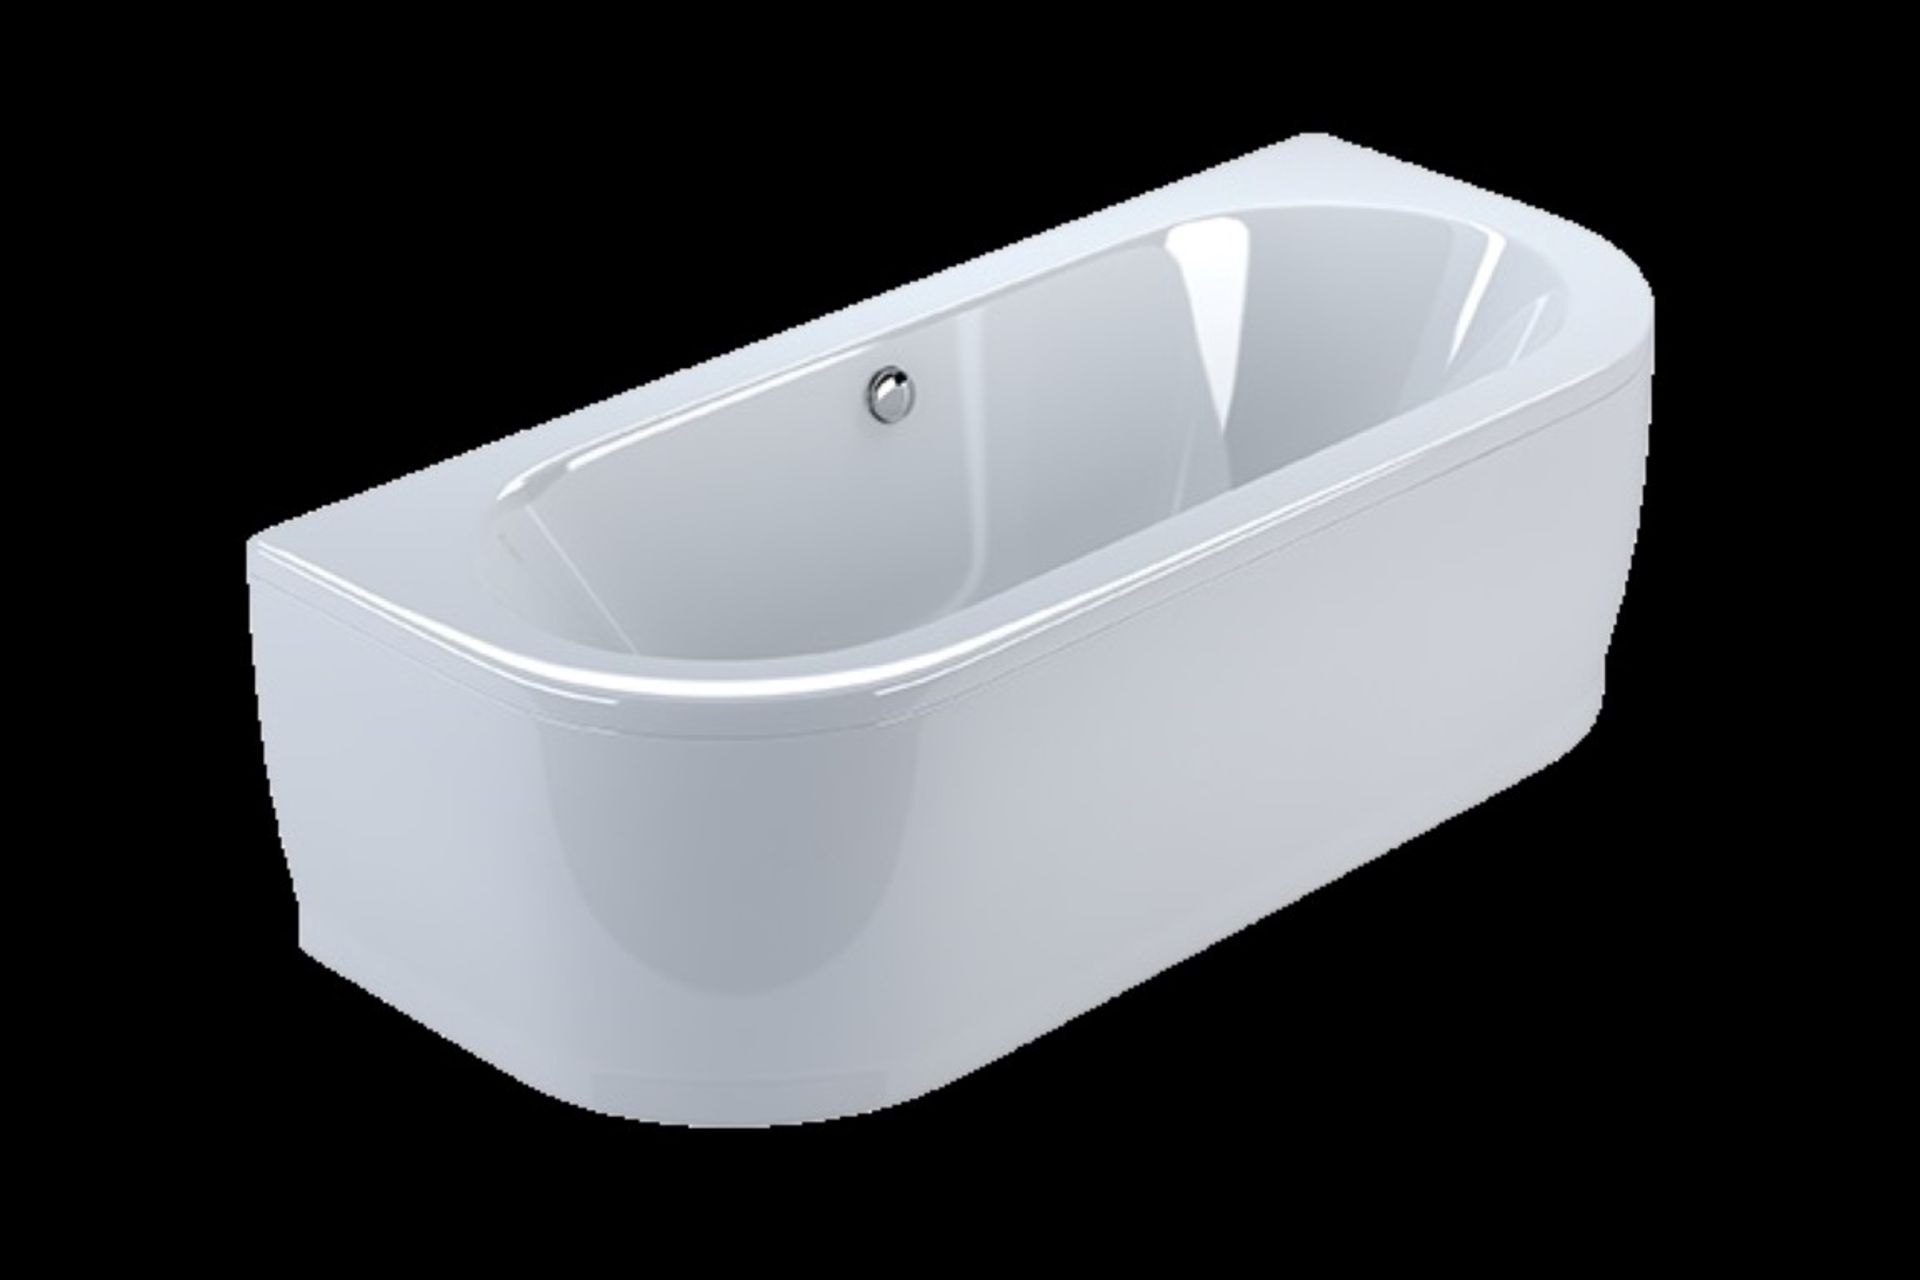 1 x "Palladio" BACK TO WALL BATH - Stylish Curvaceous Design - White Acrylic - 1700 X 750MM - - Image 7 of 9